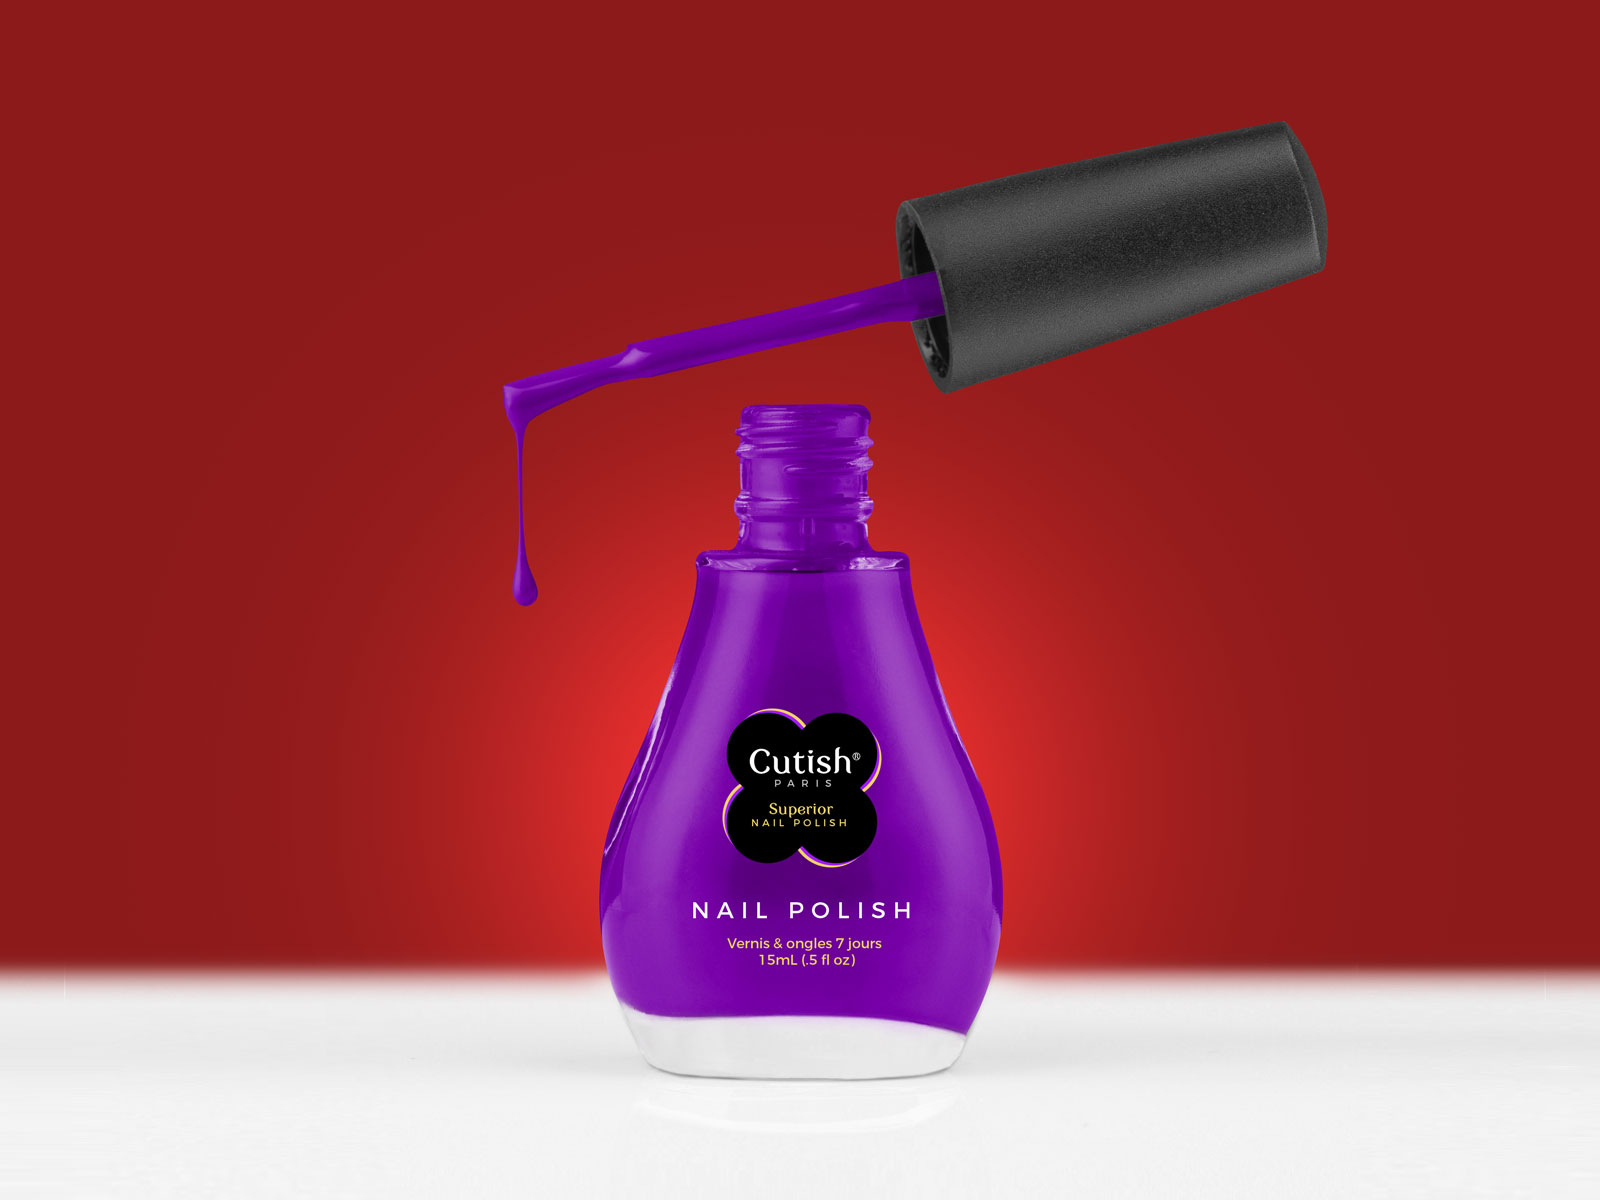 Download Free Nail Polish Bottle Mockup PSD by Zee Que | Designbolts on Dribbble